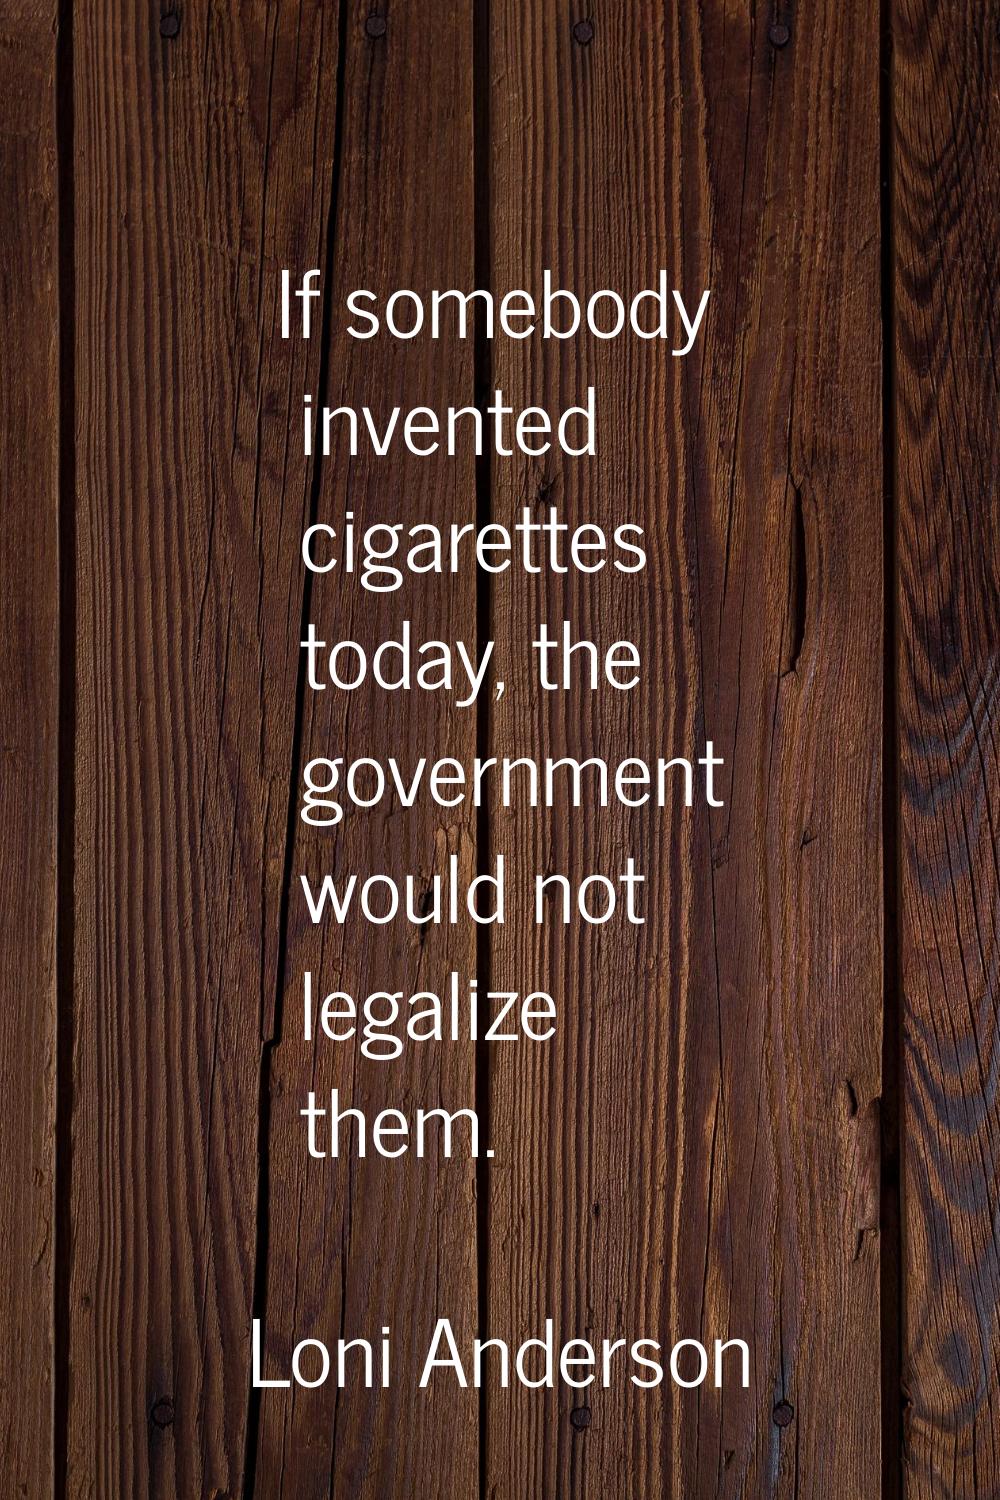 If somebody invented cigarettes today, the government would not legalize them.